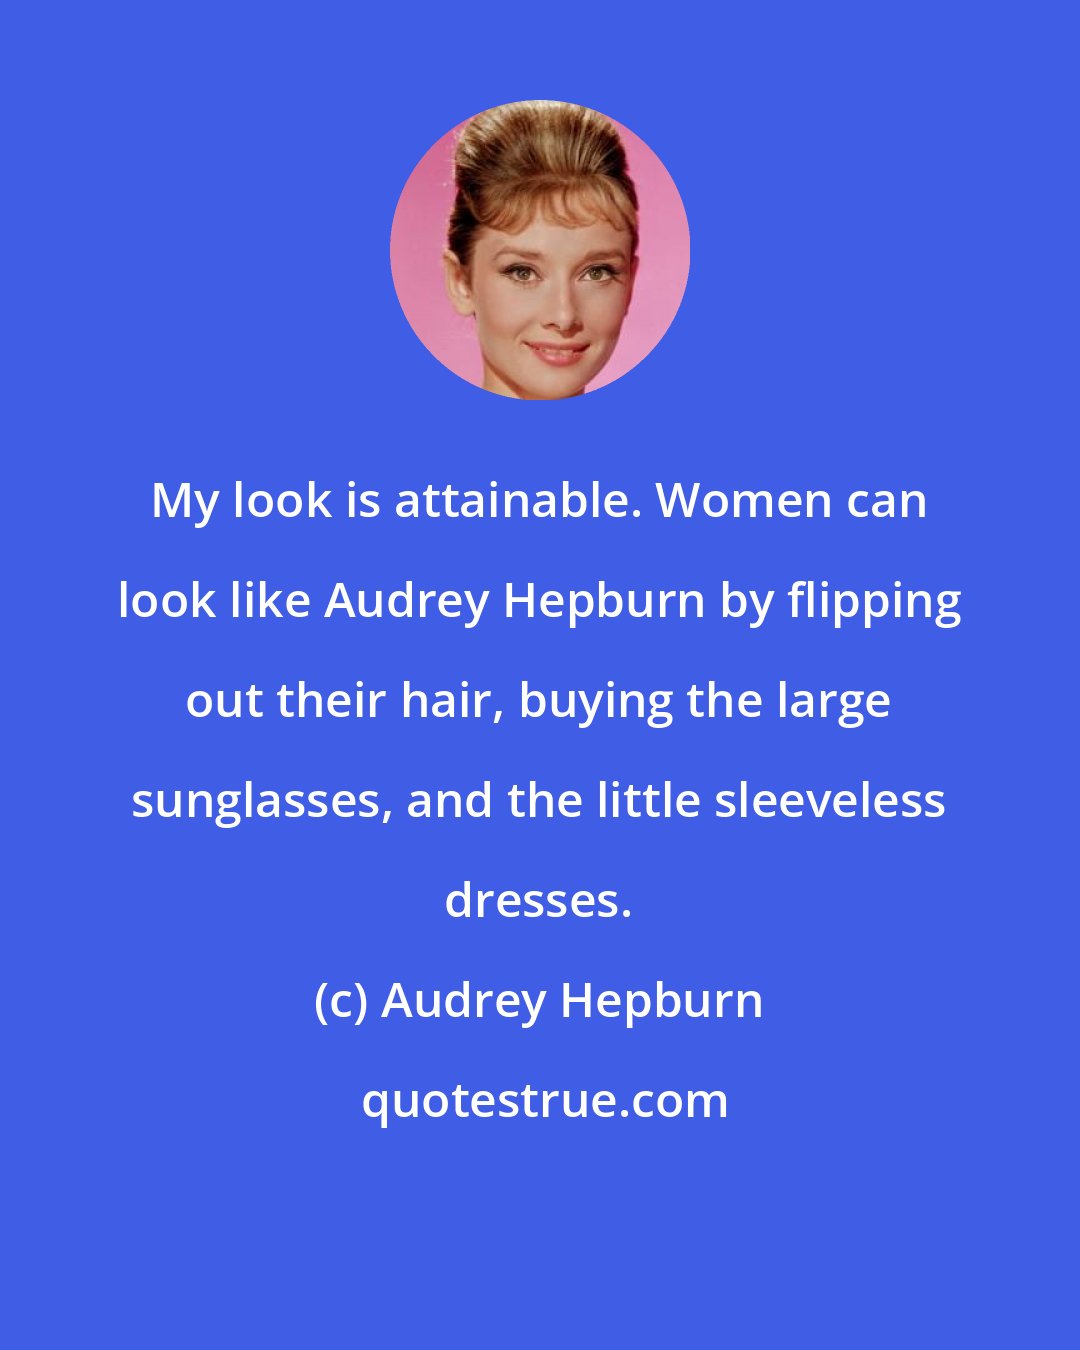 Audrey Hepburn: My look is attainable. Women can look like Audrey Hepburn by flipping out their hair, buying the large sunglasses, and the little sleeveless dresses.